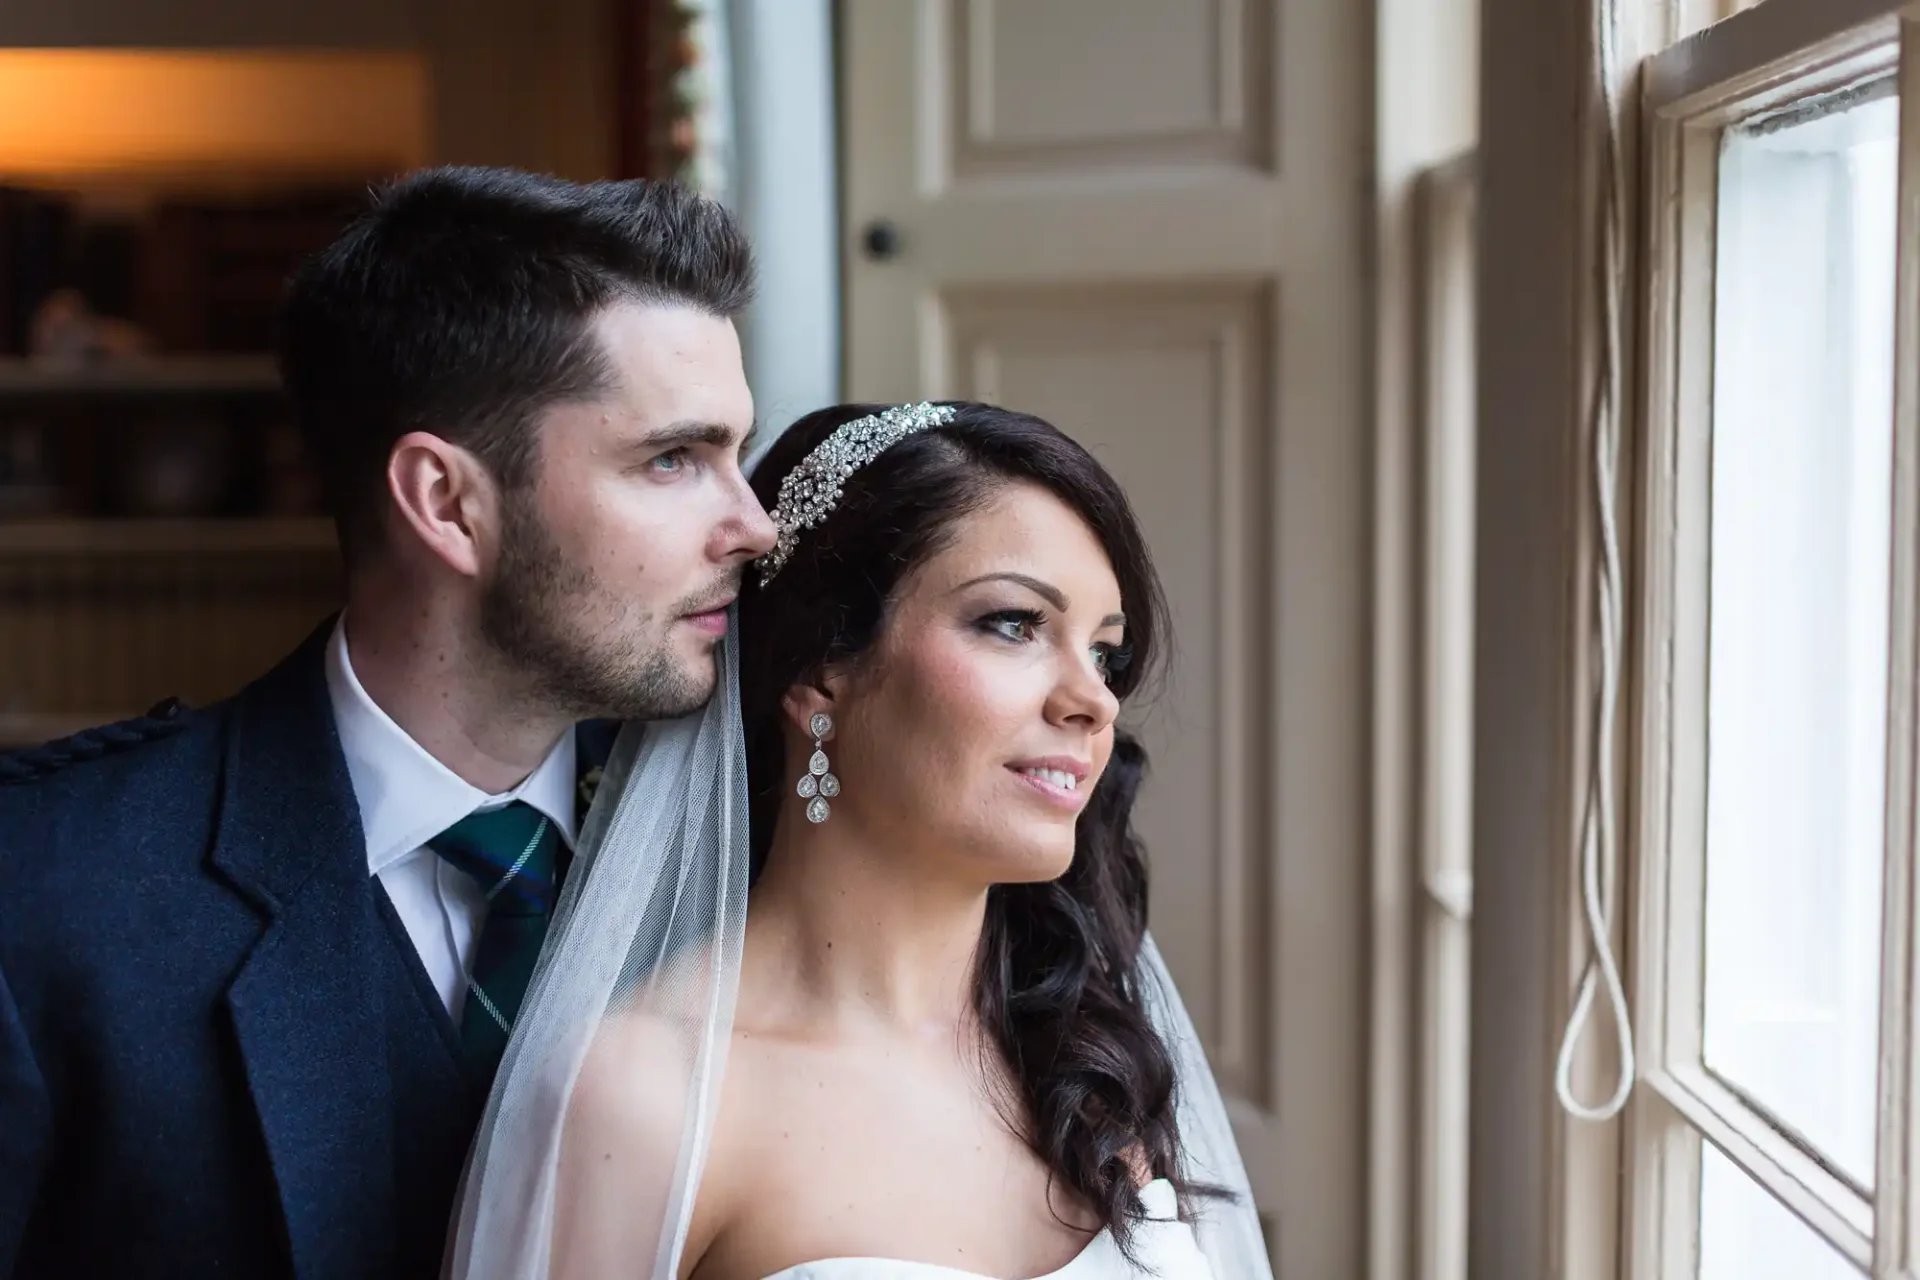 A bride and groom in formal wear gaze out a window, showing profiles with a focus on their expressions of anticipation or reflection.